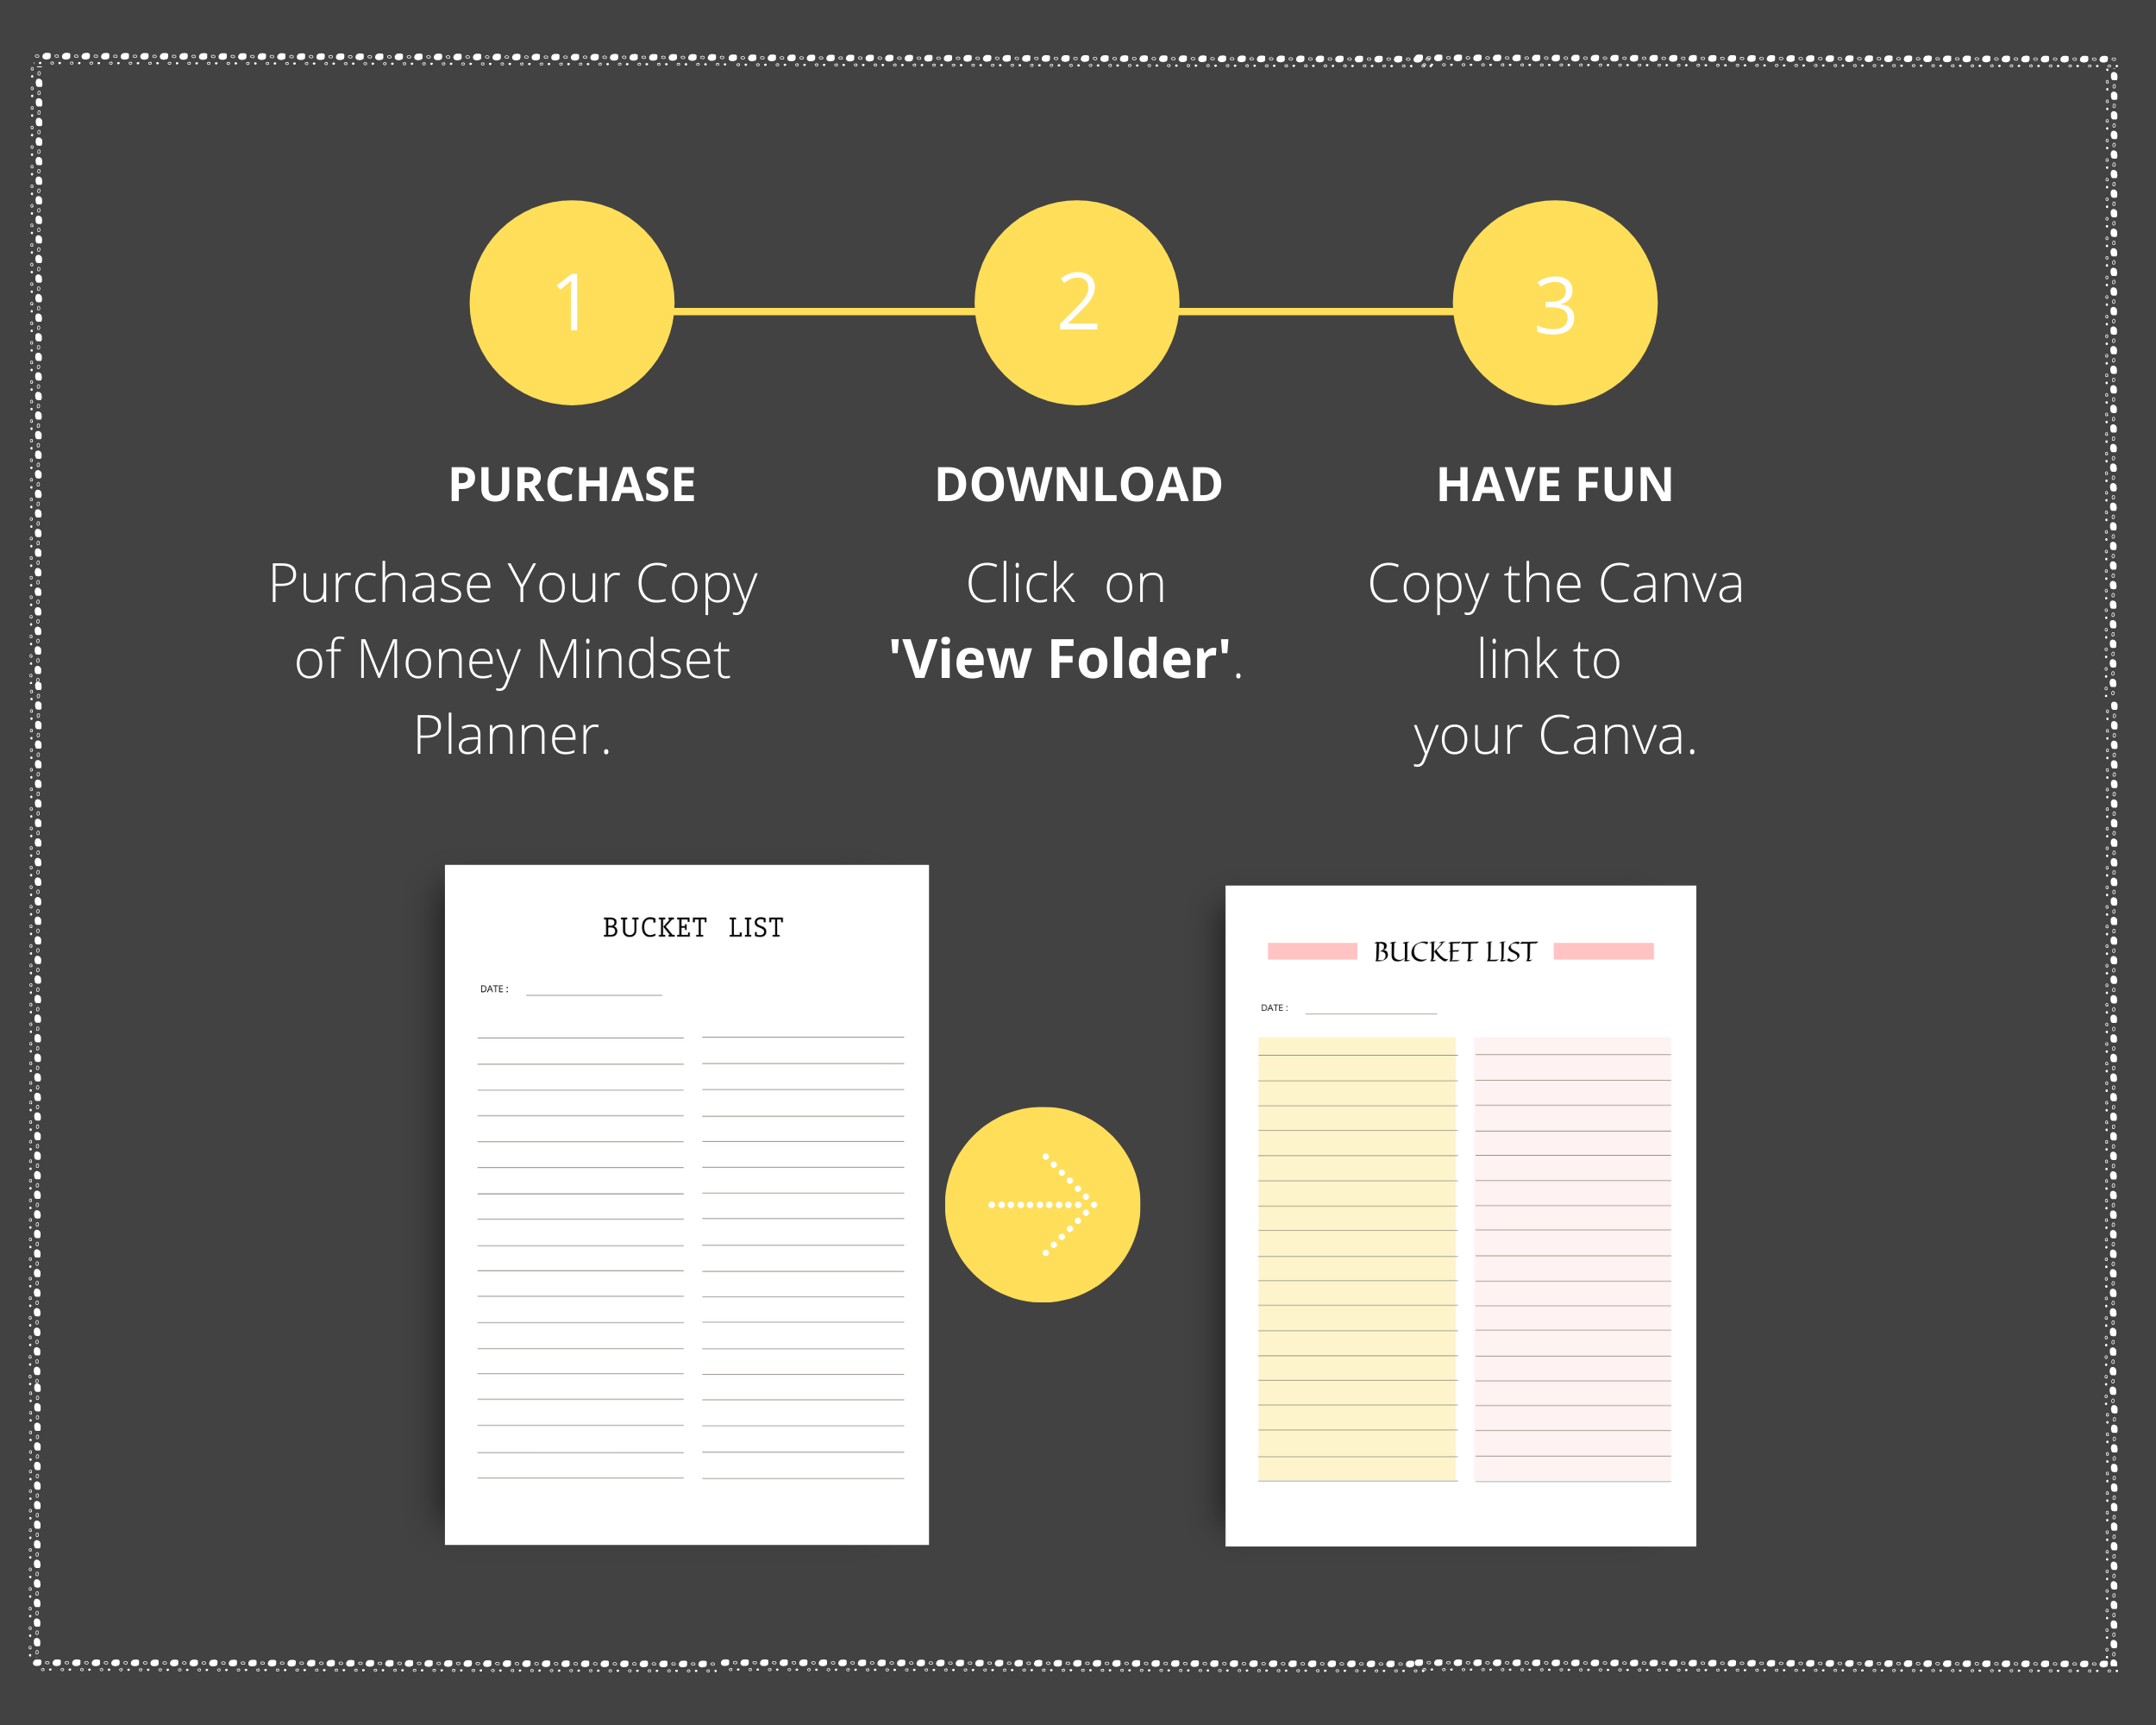 Editable Money Mindset Planner Templates in Canva | Commercial Use